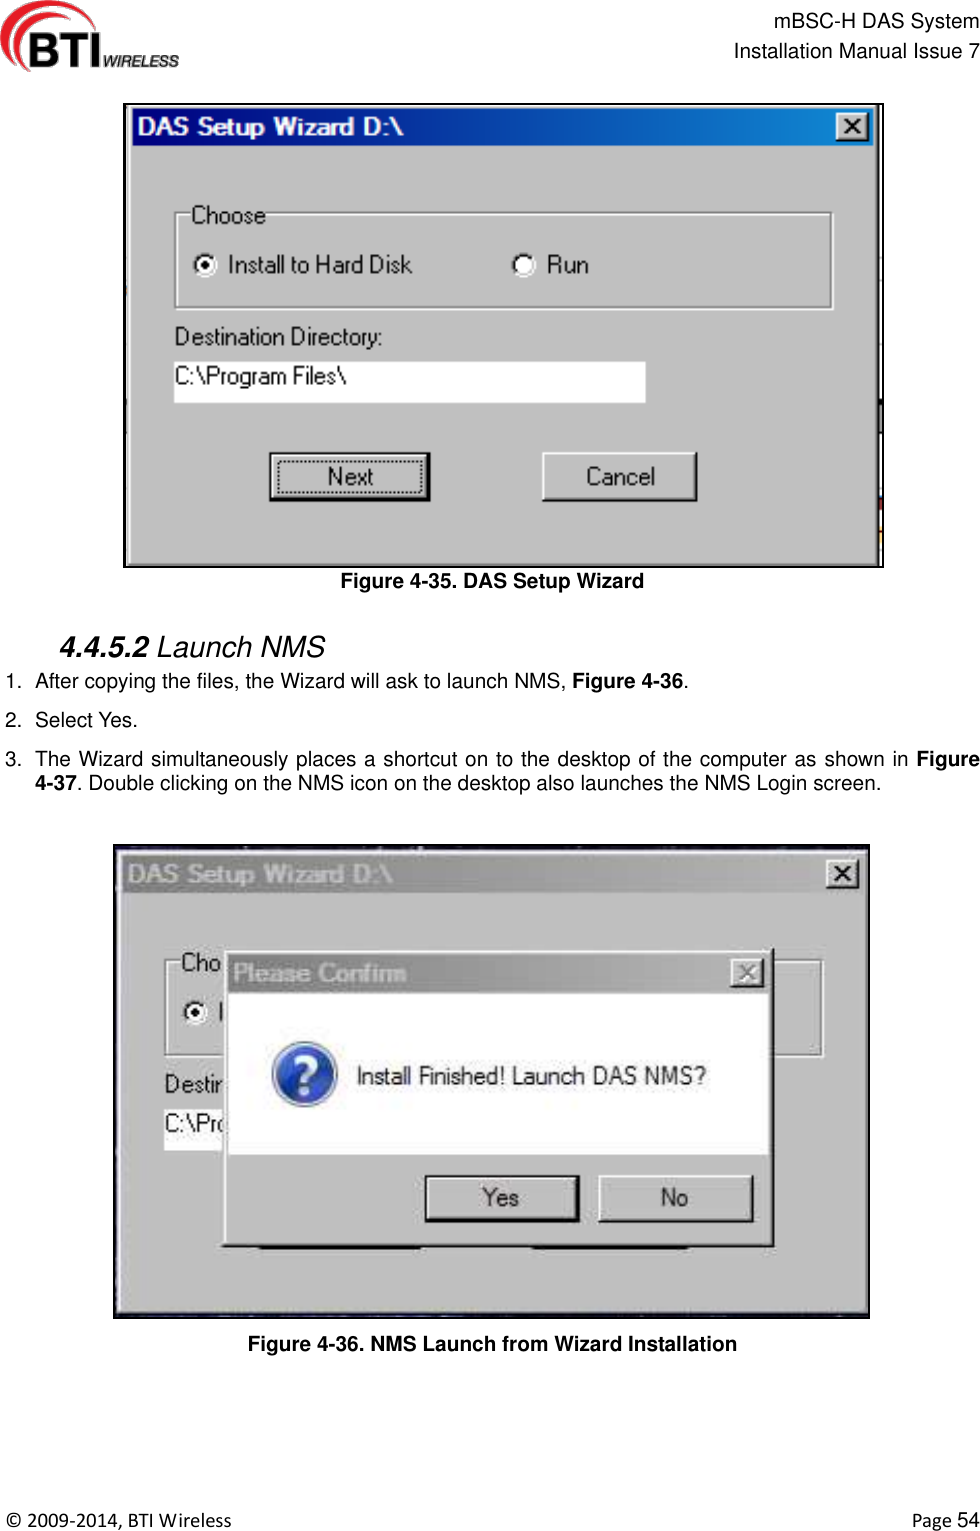                                                   mBSC-H DAS System   Installation Manual Issue 7  ©  2009-2014, BTI Wireless    Page 54  Figure 4-35. DAS Setup Wizard   4.4.5.2 Launch NMS 1.  After copying the files, the Wizard will ask to launch NMS, Figure 4-36.   2.  Select Yes. 3.  The Wizard simultaneously places a shortcut on to the desktop of the computer as shown in Figure 4-37. Double clicking on the NMS icon on the desktop also launches the NMS Login screen.  Figure 4-36. NMS Launch from Wizard Installation  